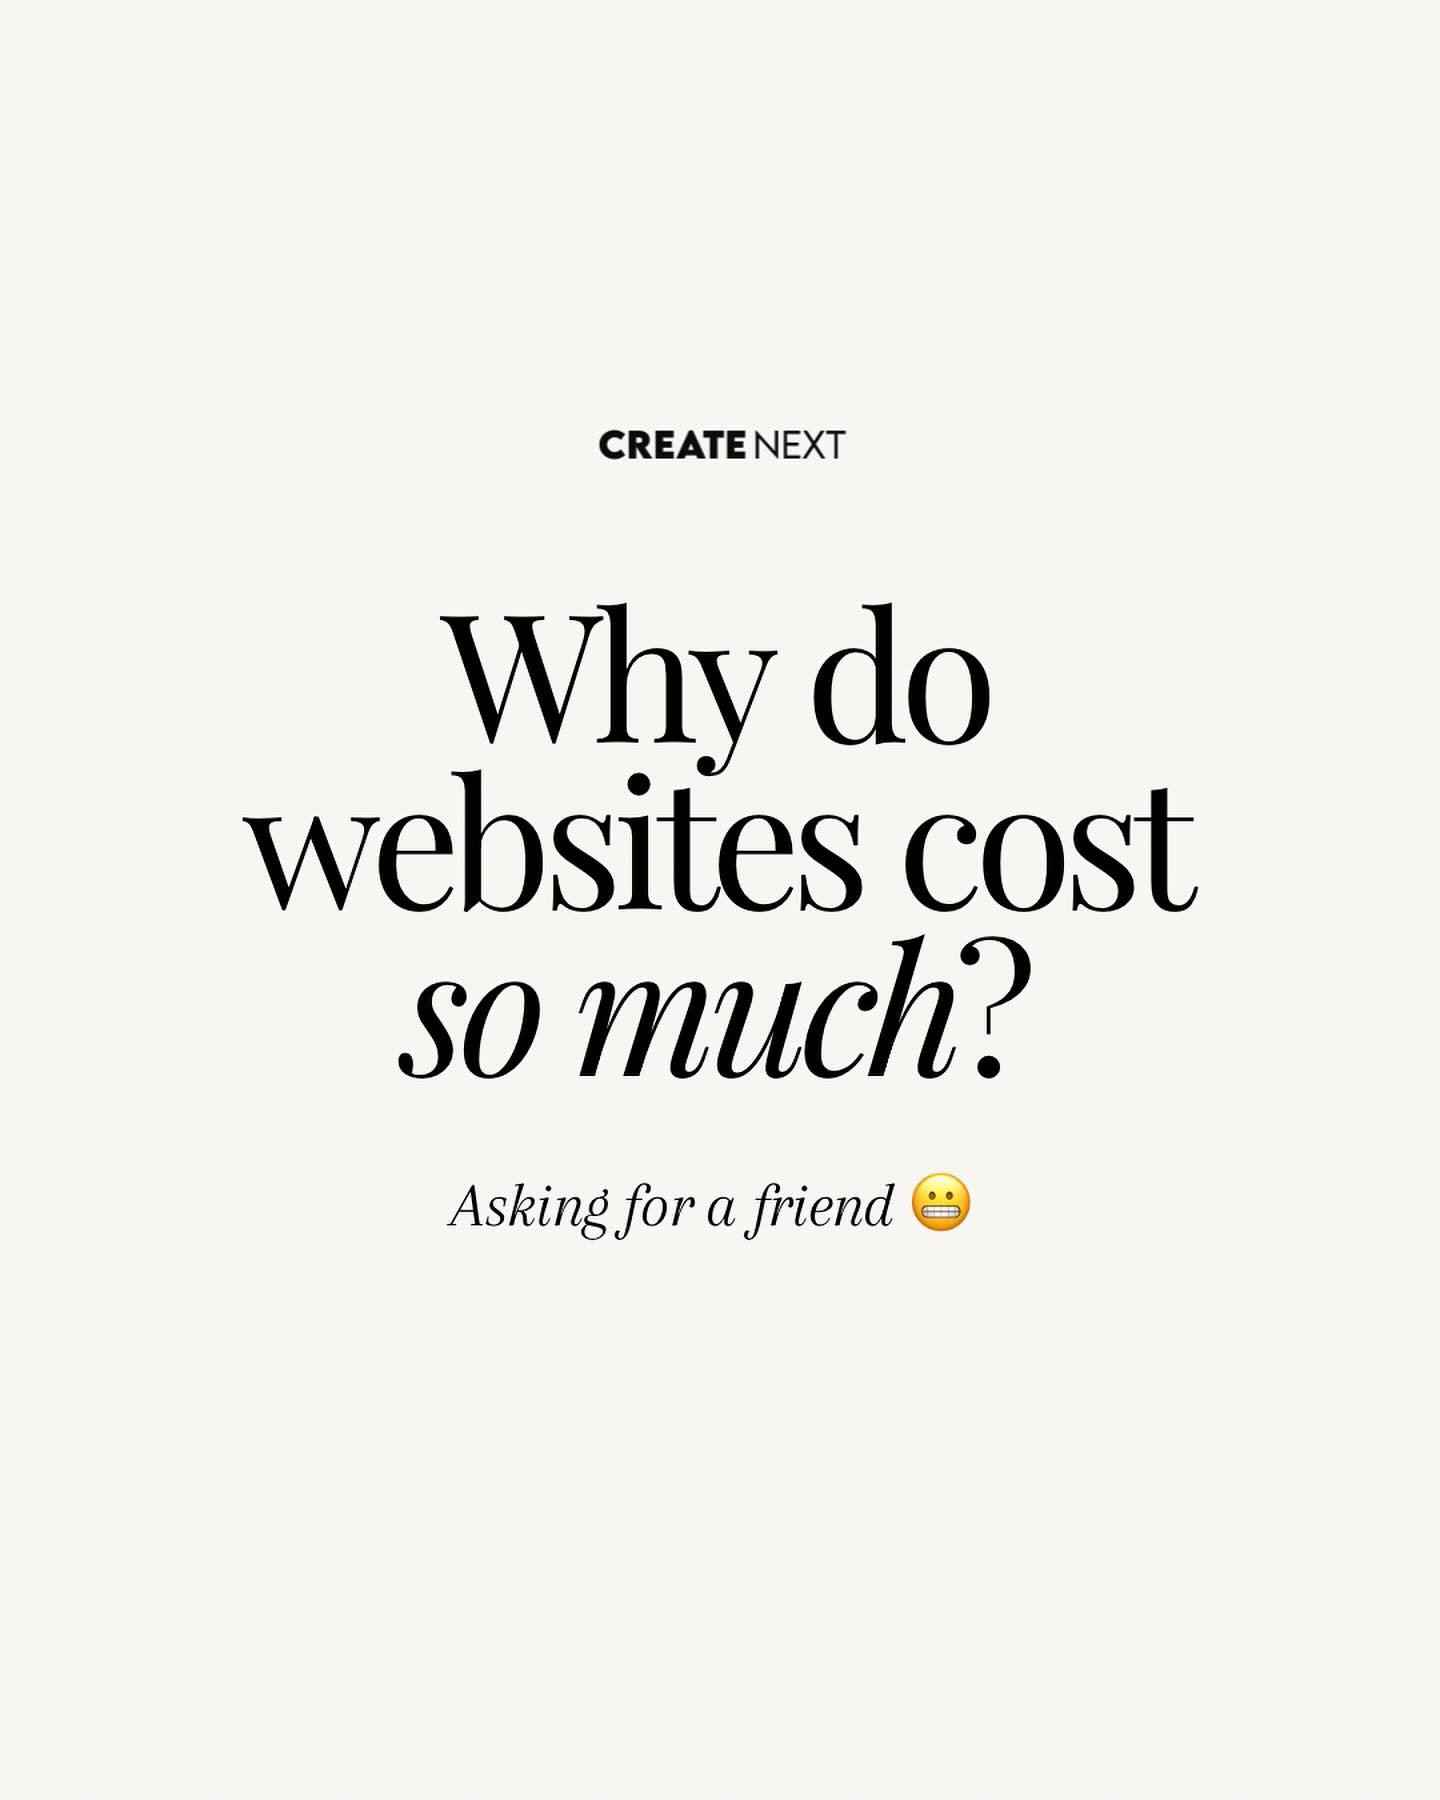 Great design is invisible. 

When you use a website and manage to get all the info you need or checkout out seamlessly. You move on with your day without thinking twice about it. 

We will however, remember all the friction, and frustrations we have 